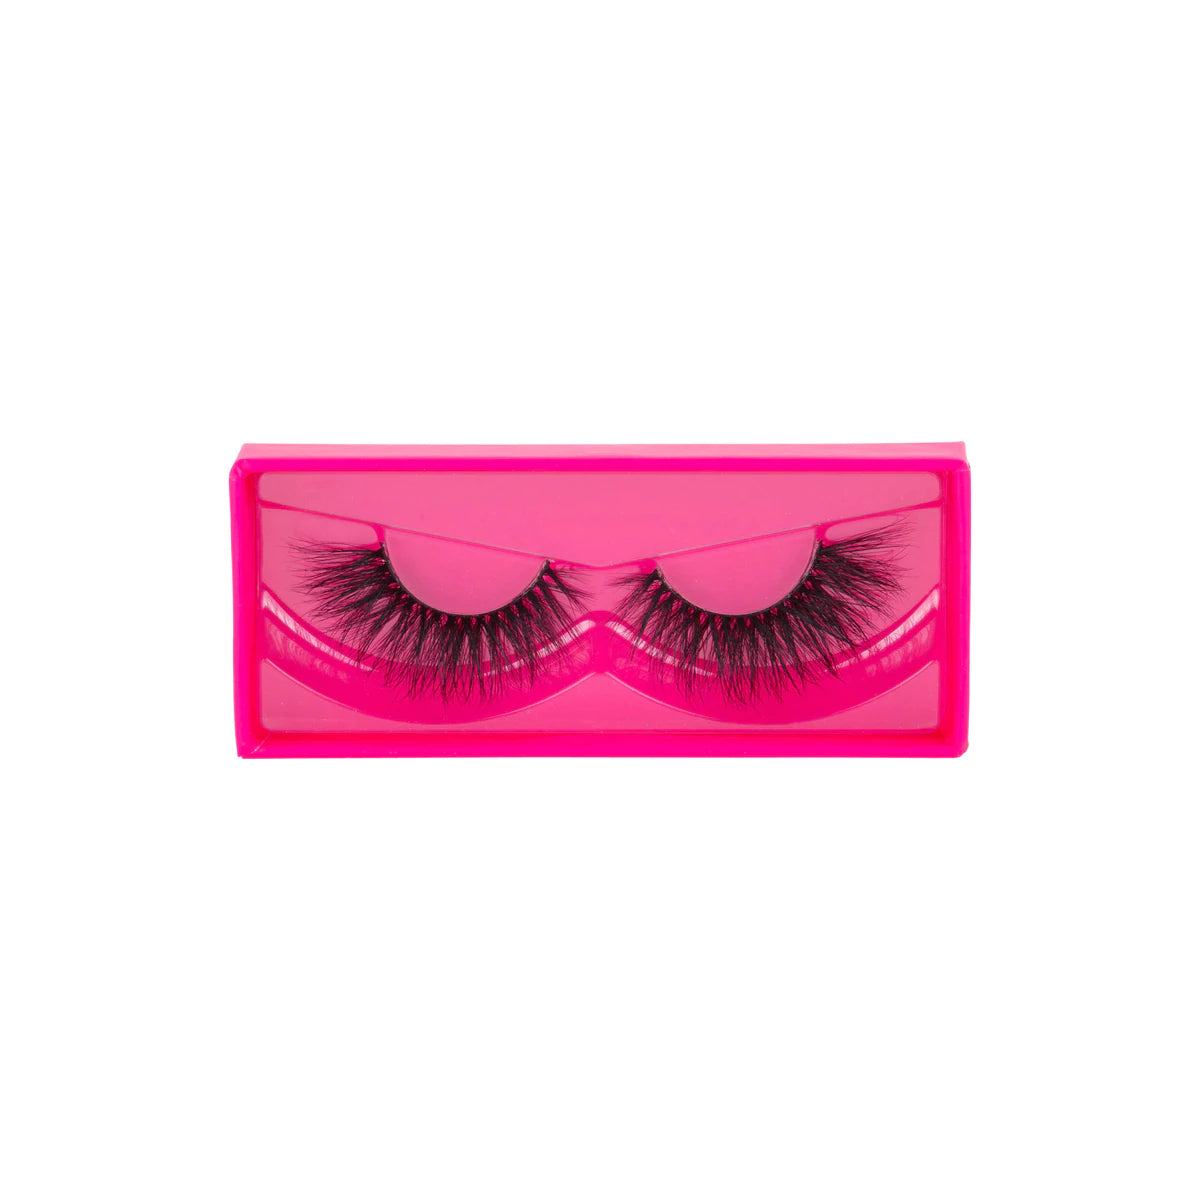 3D Faux Mink Eyelashes by Beauty Creations